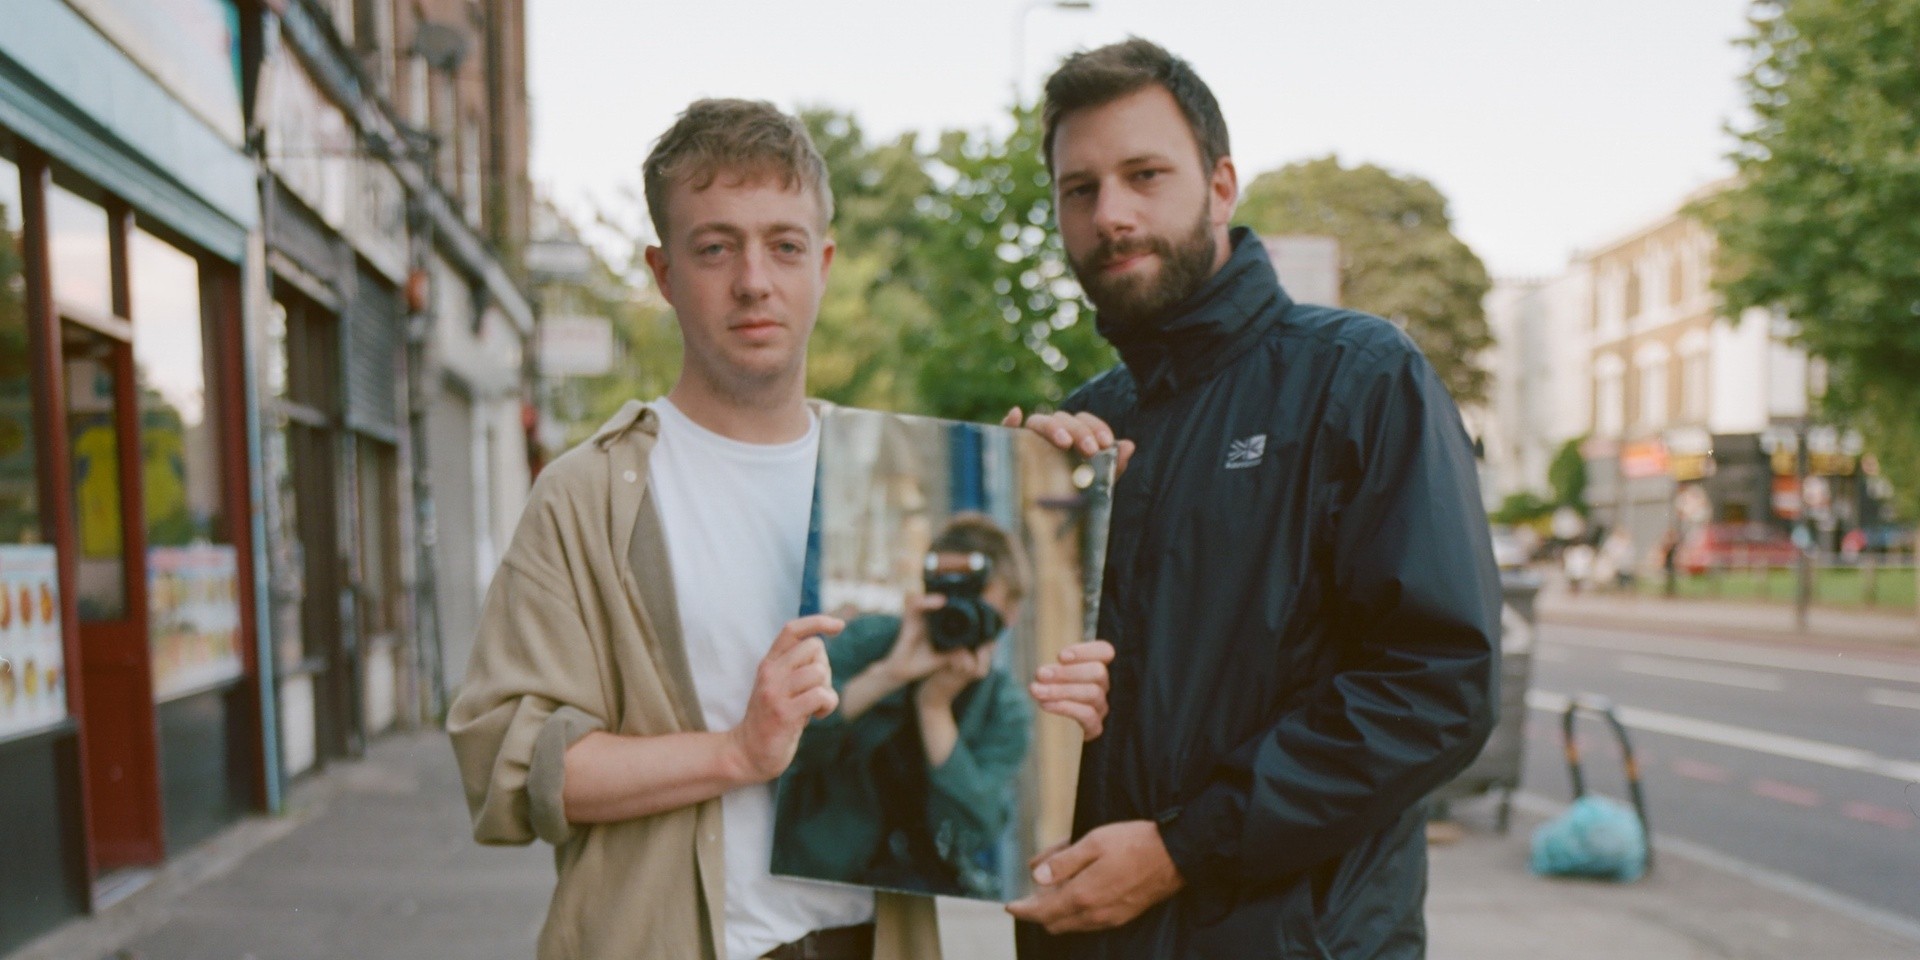 Mount Kimbie: "We're just as clueless as when we started and just as excited to do the work, but in different ways"